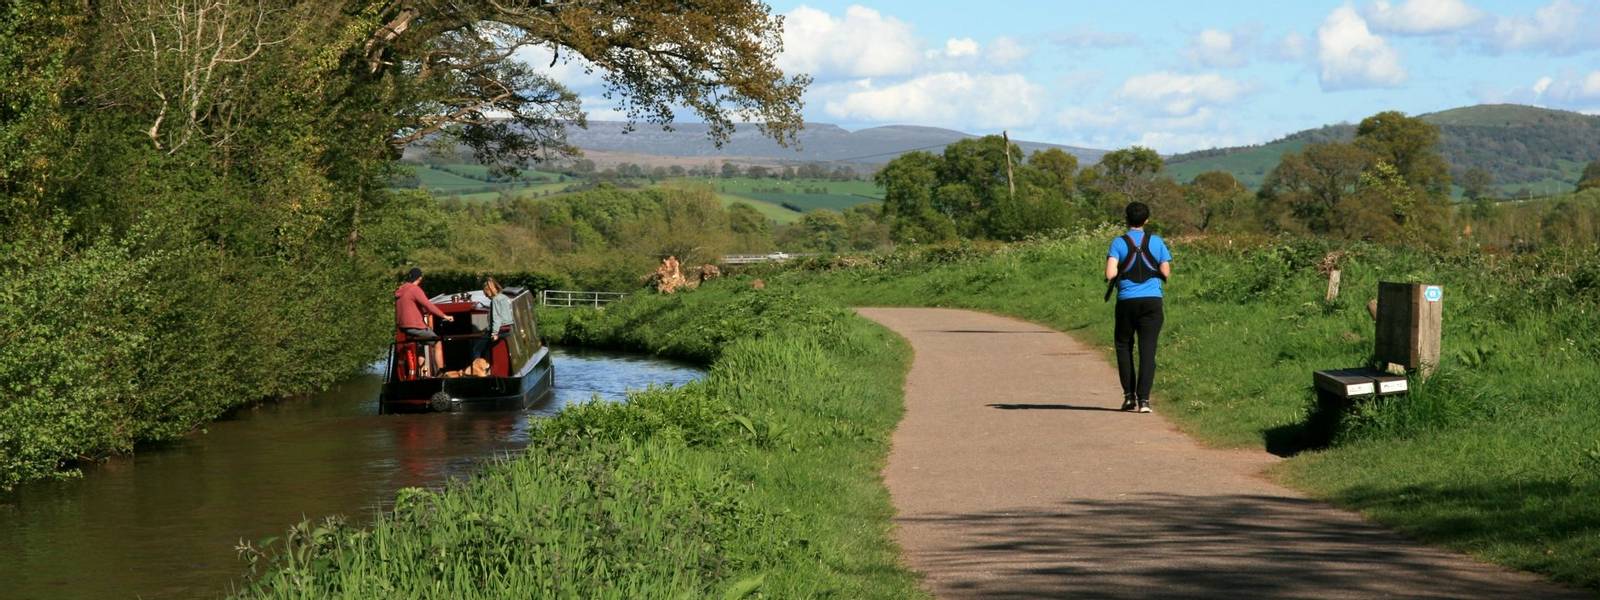 Brecon Canal with hills beyond.jpg